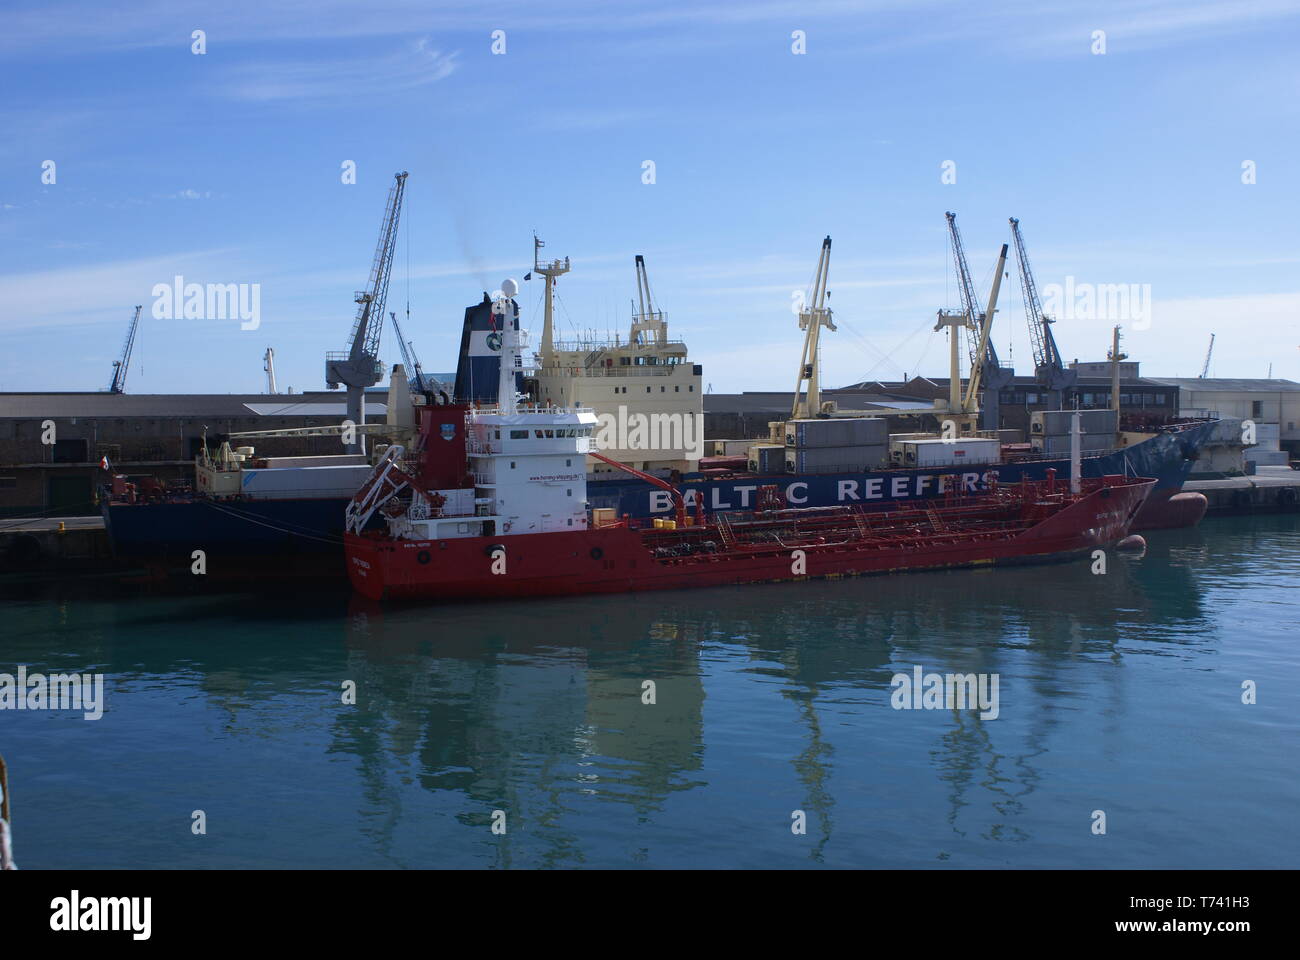 Il bunker Reefer nave in porto, Duncan Dock, Cape Town Harbour. Sud Africa. Foto Stock